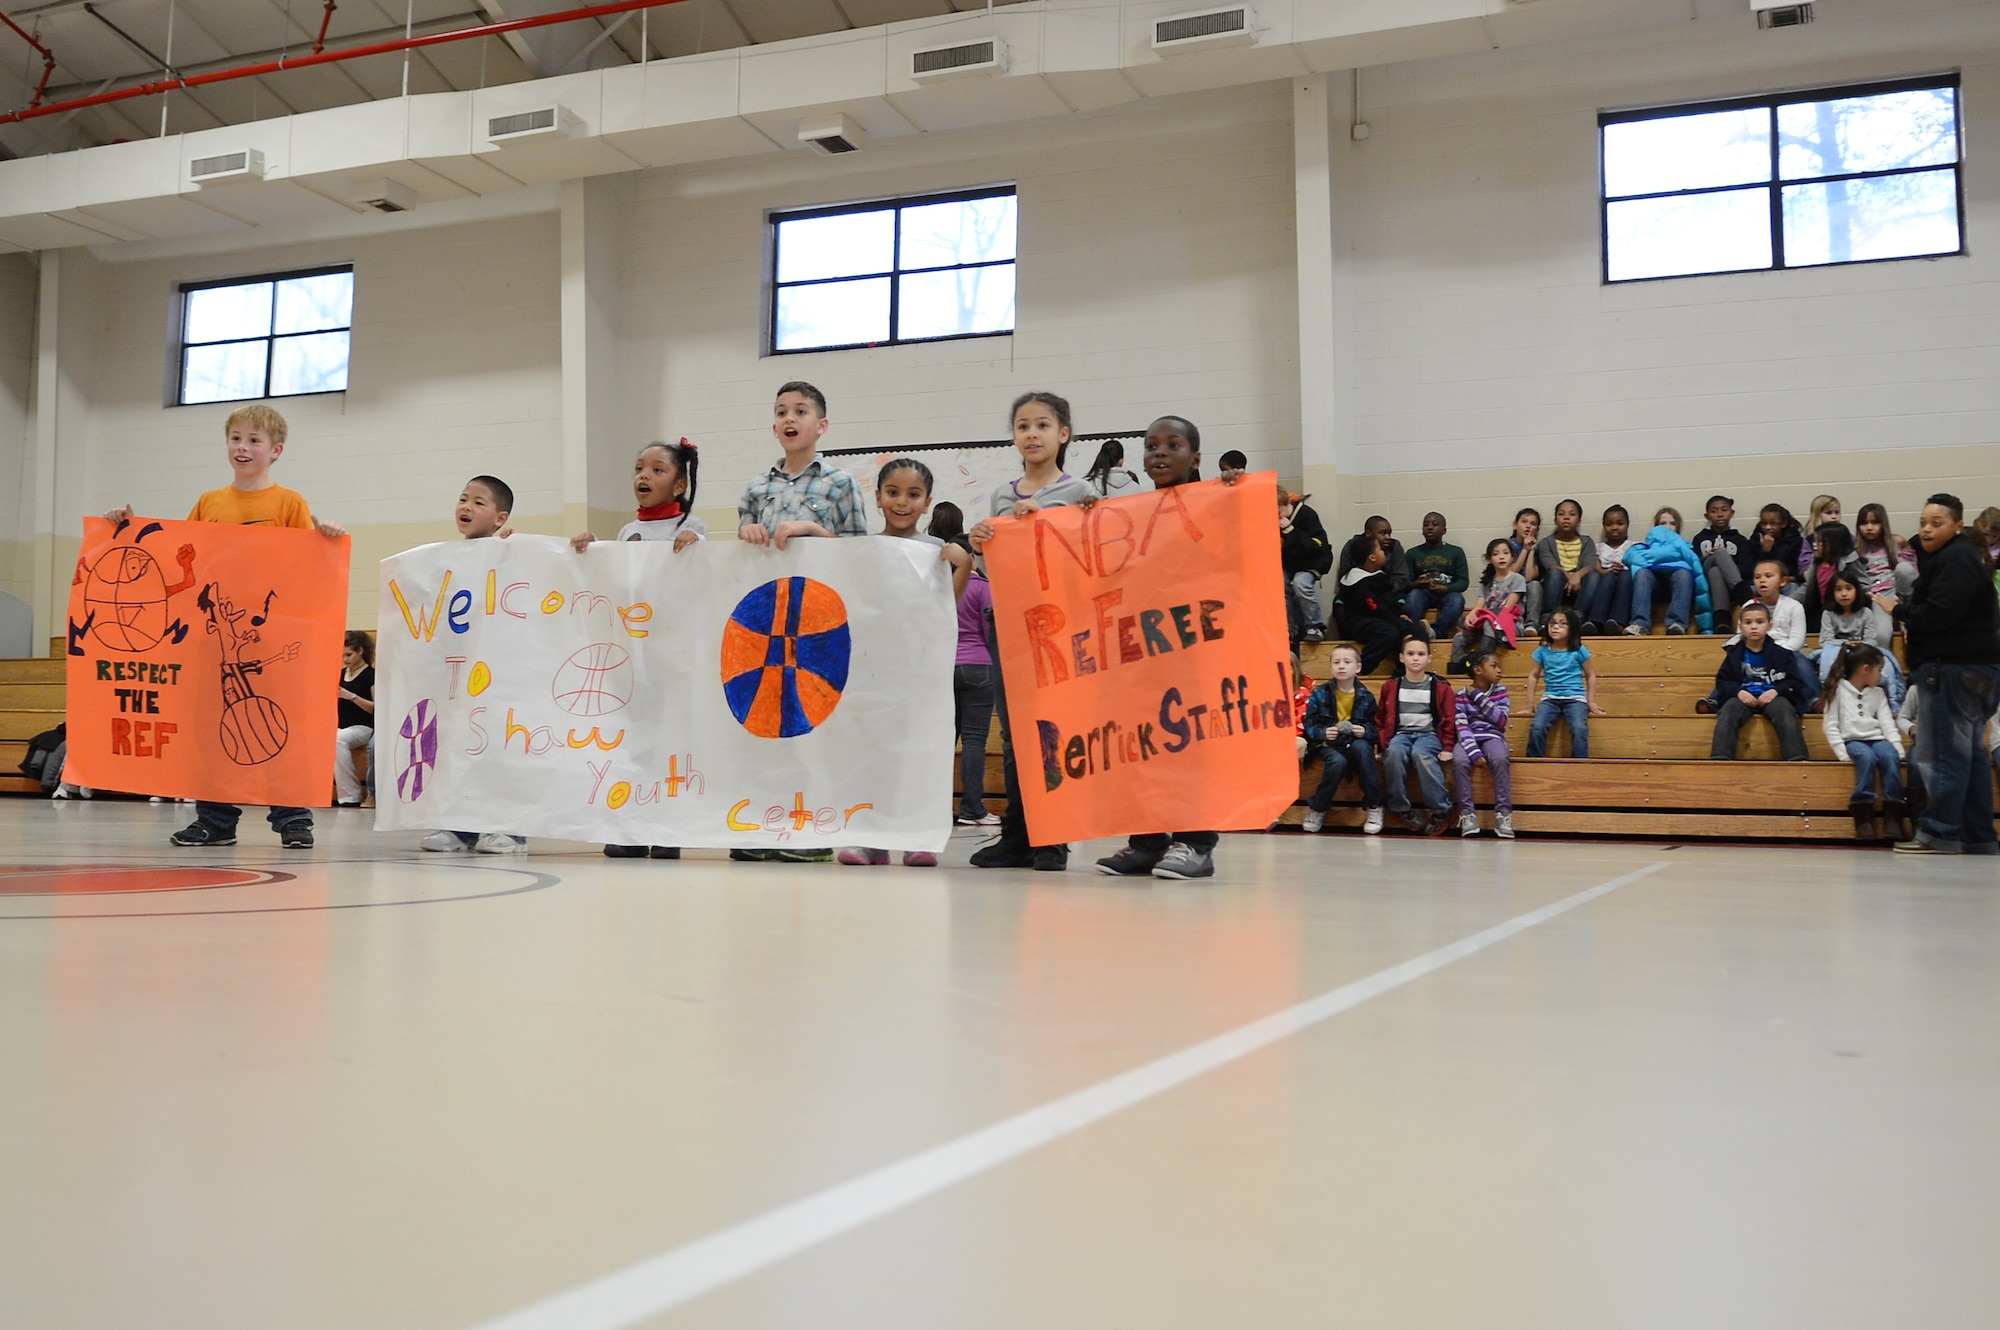 Kids hold up signs to greet Derrick Stafford, National Basketball Association referee, at the Shaw Air Force Base youth center, S.C., Dec. 14, 2012.  Stafford is in his 25th NBA season and has served twice on the executive board of the NBA Referee Association.  (U.S. Air Force photo by Airman 1st Class Nicole Sikorski/Released)